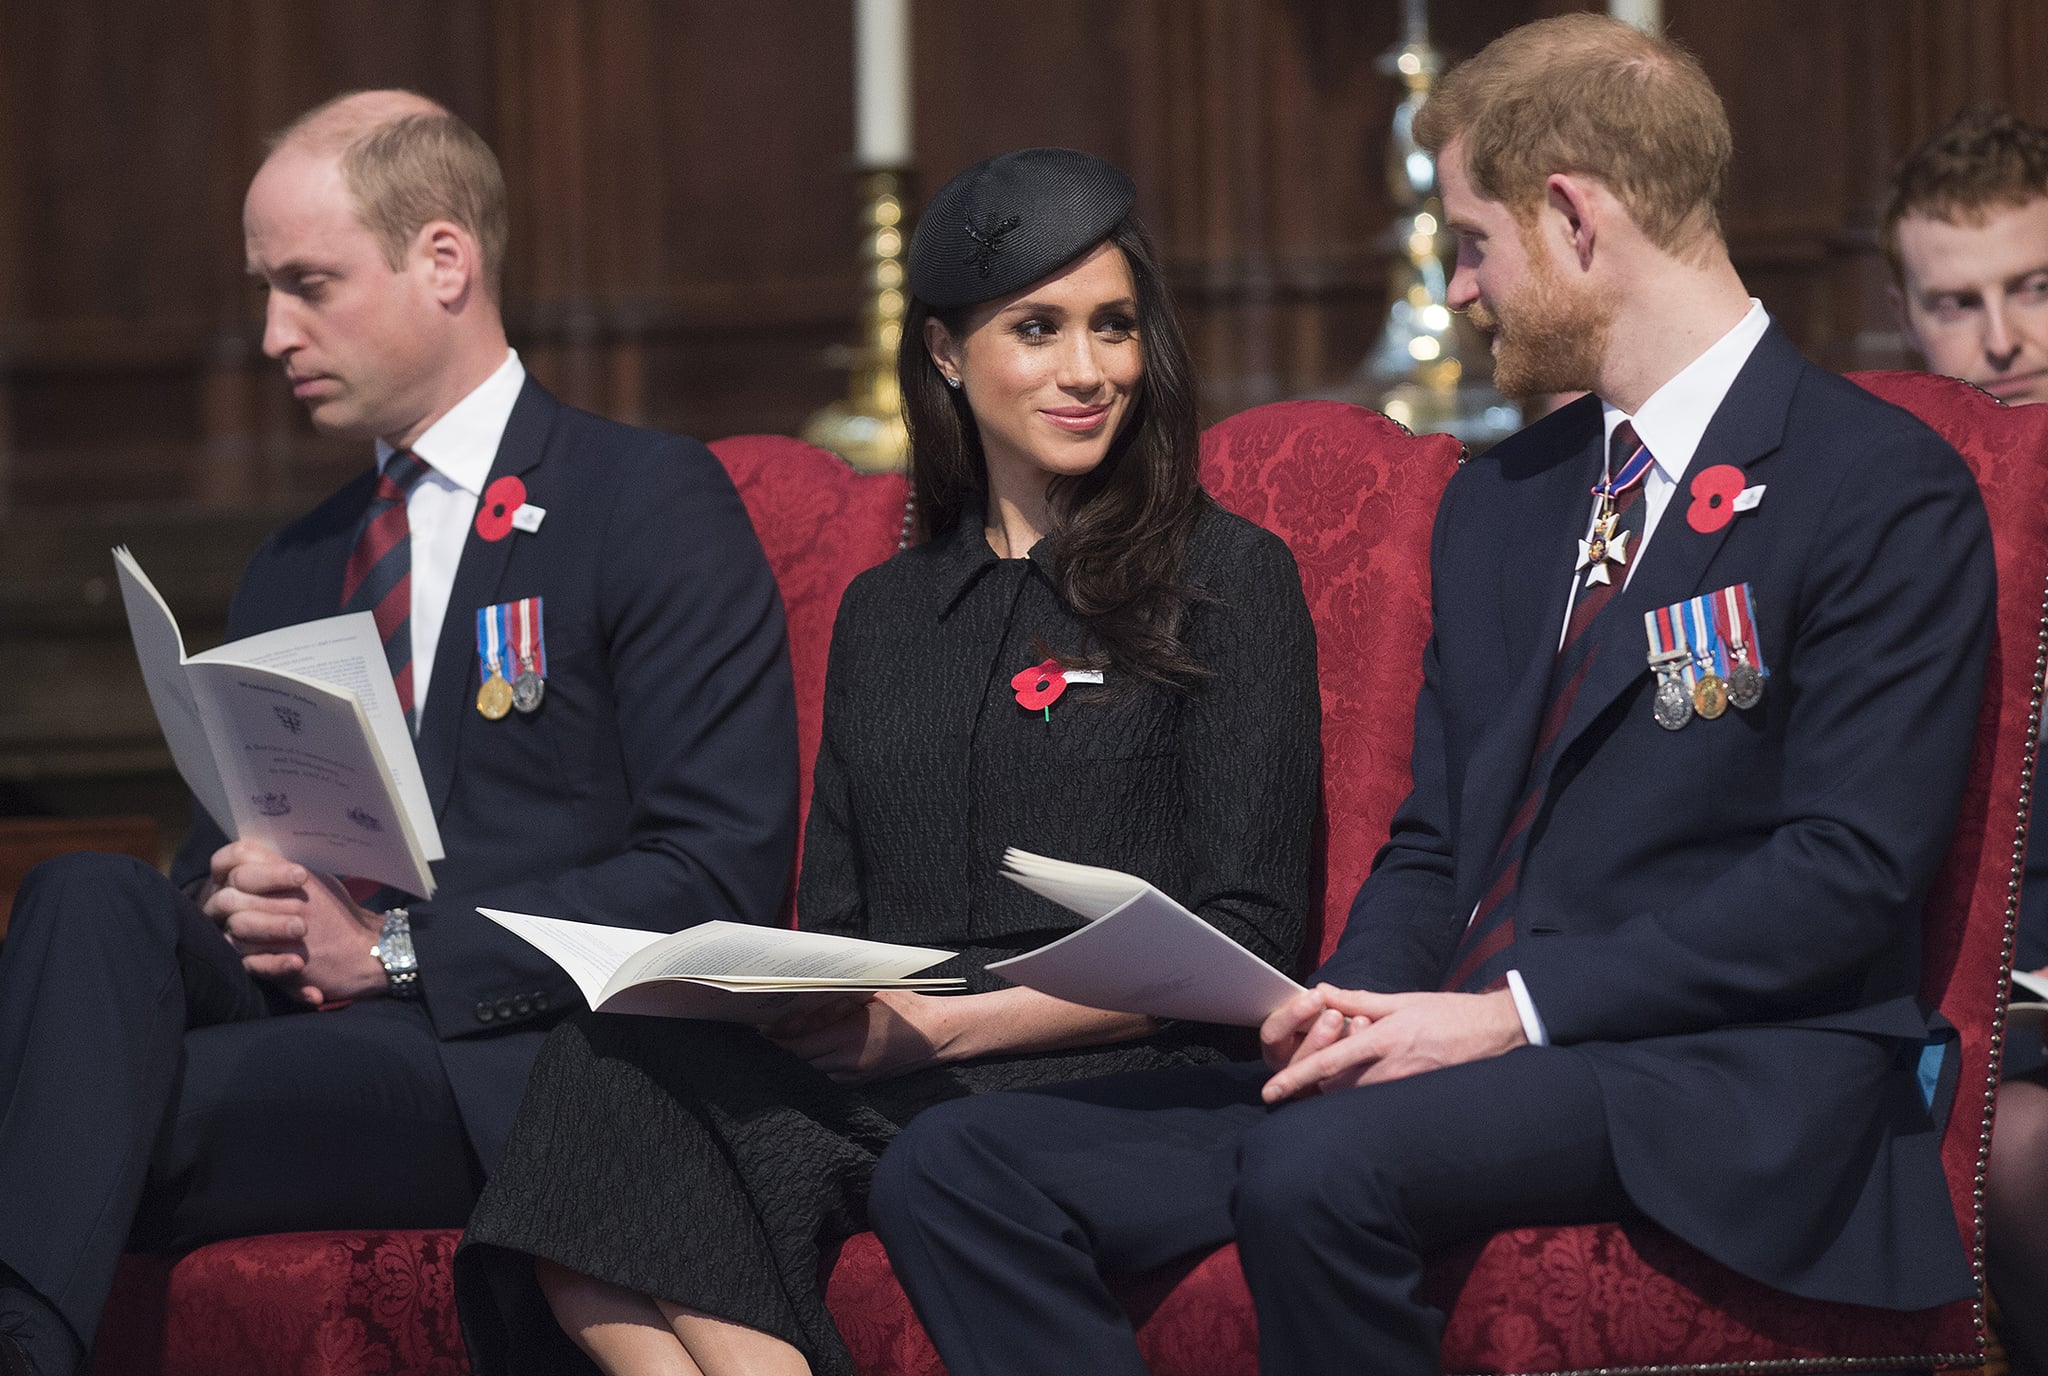 TOPSHOT - Britain's Prince Harry (R), his US fiancee Meghan Markle (C), and Britain's Prince William, Duke of Cambridge, attend a service of commemoration and thanksgiving to mark Anzac Day in Westminster Abbey in London on April 25, 2018. - Anzac Day marks the anniversary of the first major military action fought by Australian and New Zealand forces during the First World War. The Australian and New Zealand Army Corps (ANZAC) landed at Gallipoli in Turkey during World War I. (Photo by Eddie MULHOLLAND / POOL / AFP)        (Photo credit should read EDDIE MULHOLLAND/AFP/Getty Images)